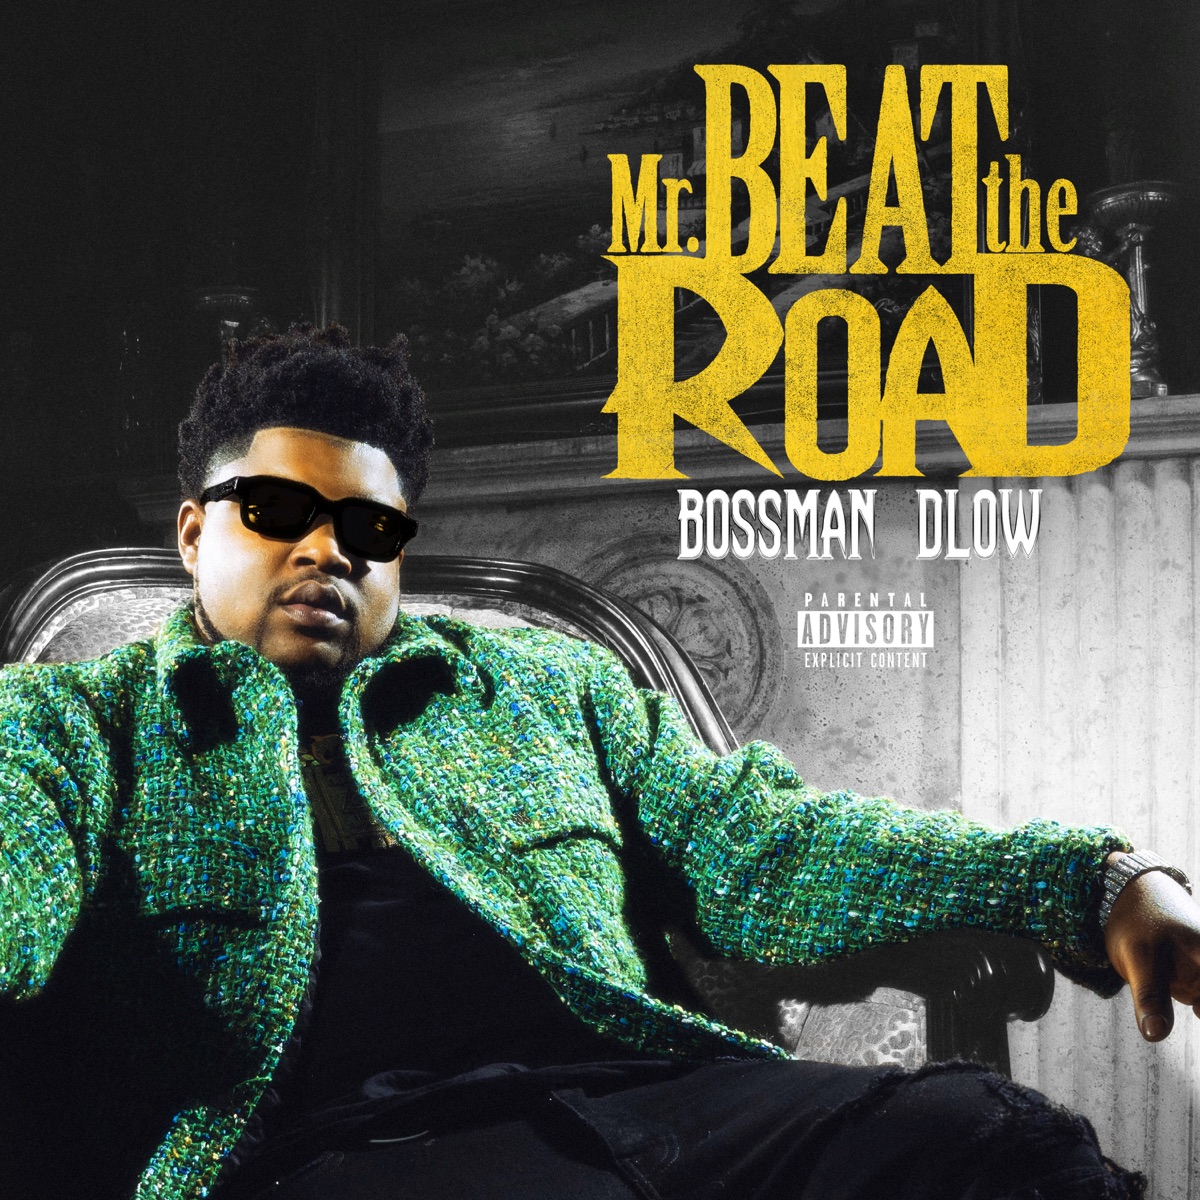 Mr.+Beat+the+Road+promotional+material+via+Apple+Music